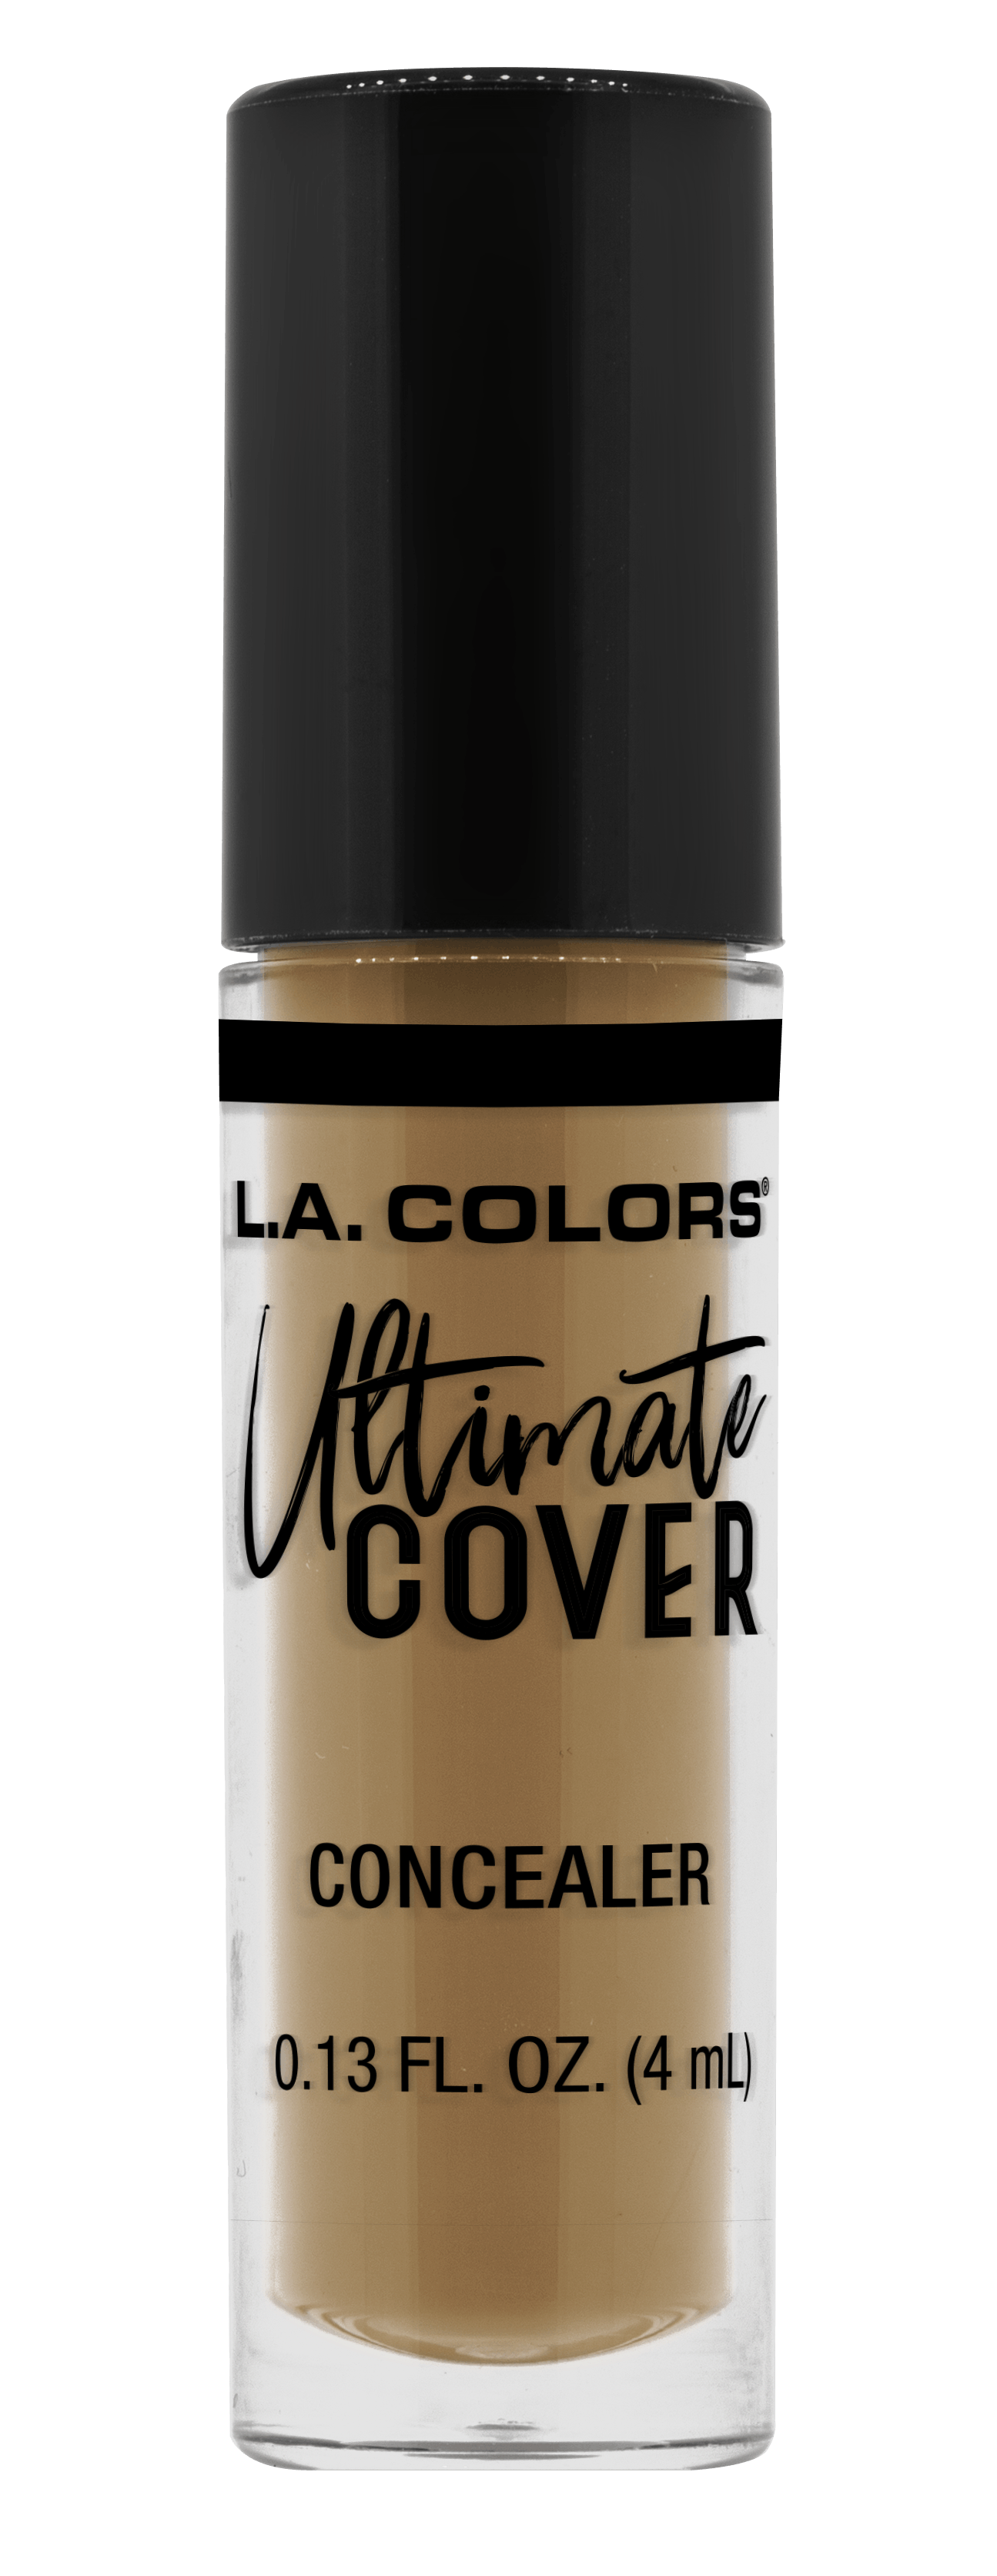 L.A. COLORS Ultimate Cover Concealer Nude 4 ml